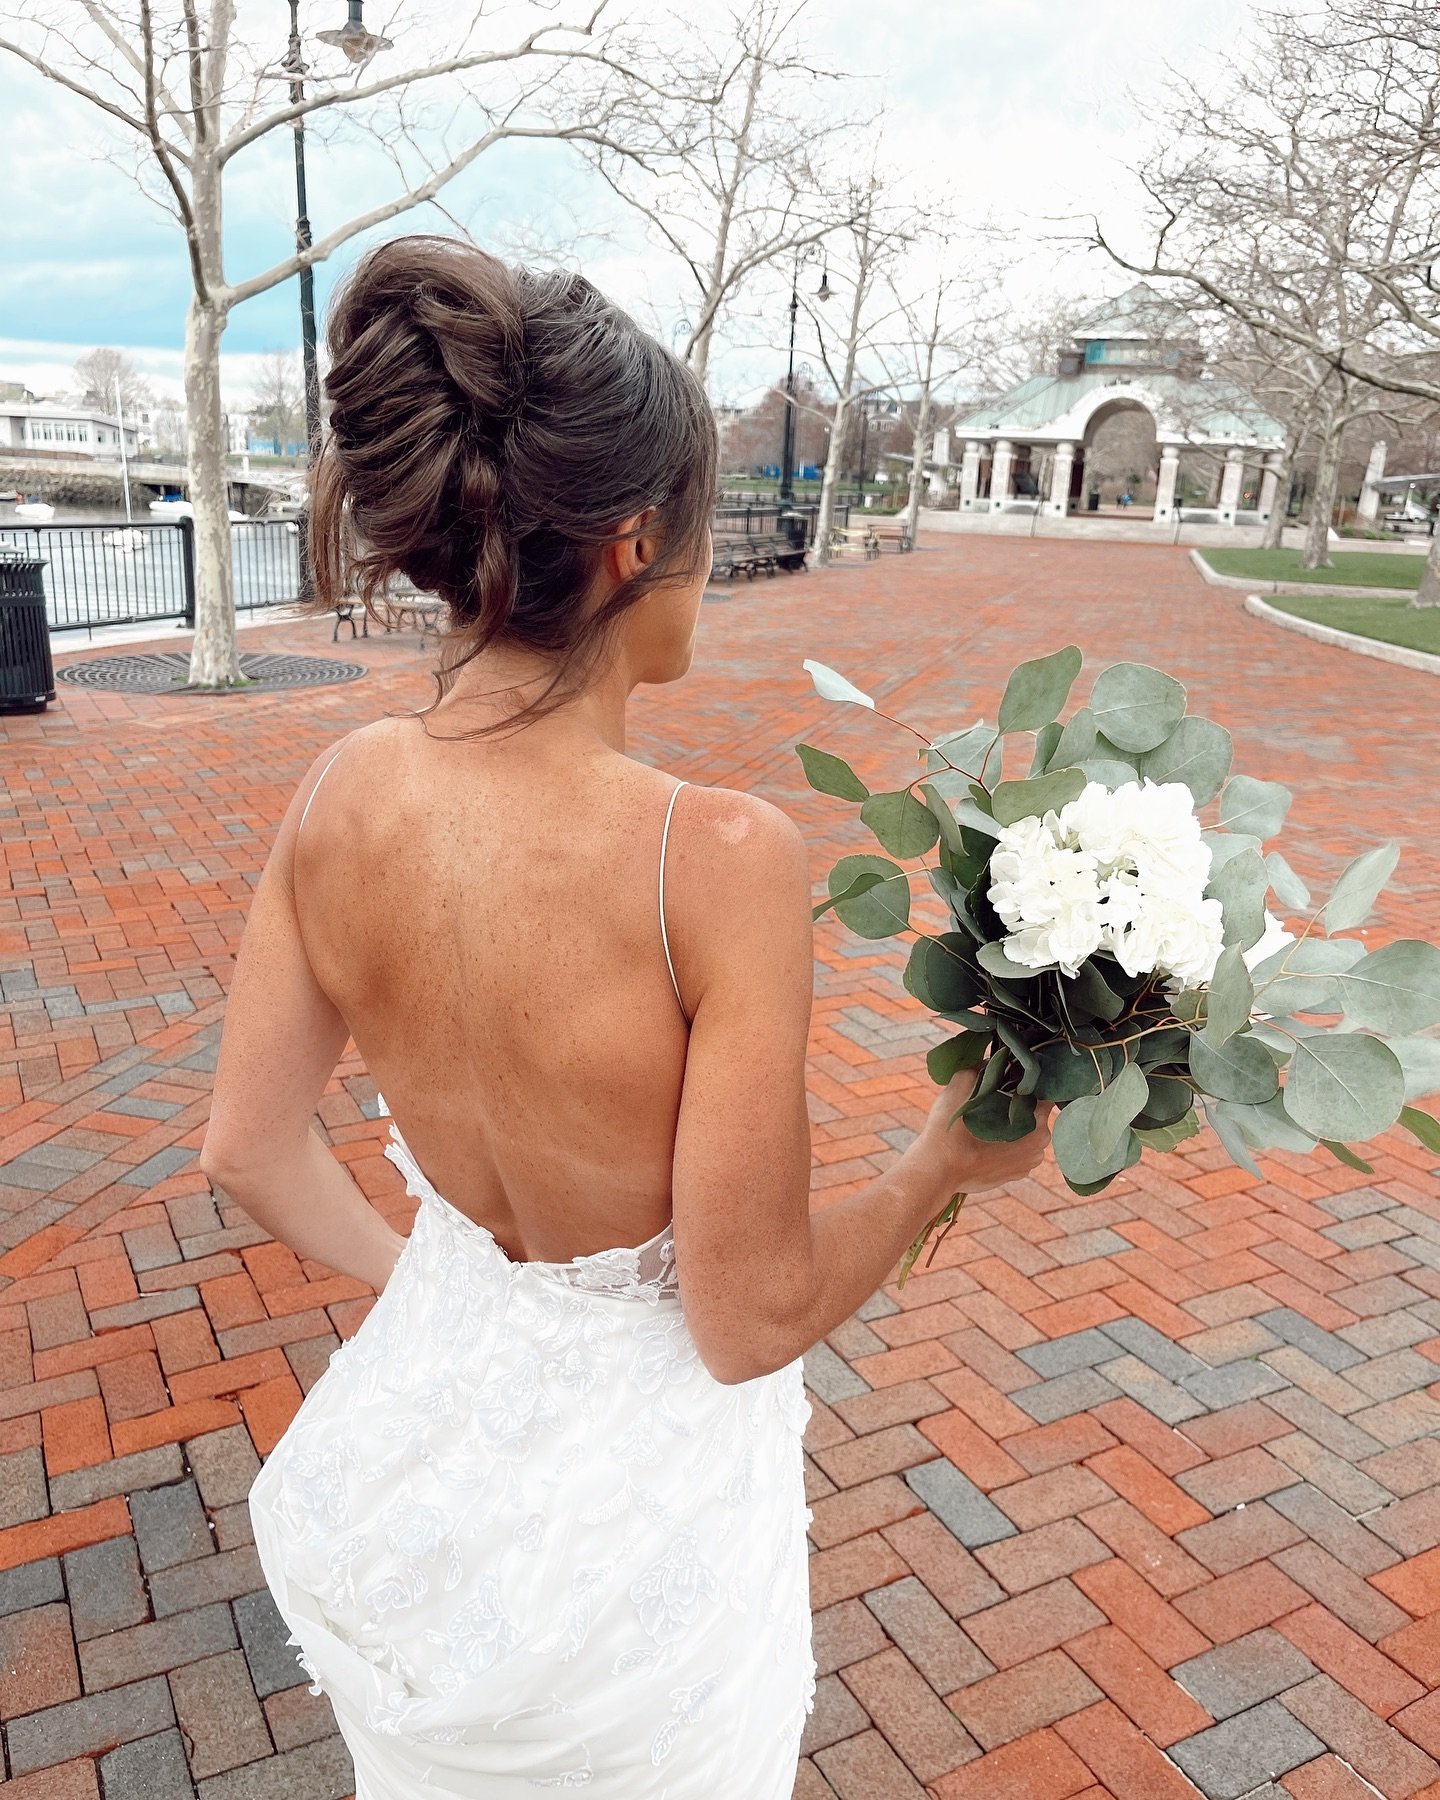 Boston brides&hellip;we are coming for you! 💋
P.S. more hair like this please! 

.
.
.
#bostonbride #bostonwedding #weddinginspiration #bostonbridal #bostonbrides